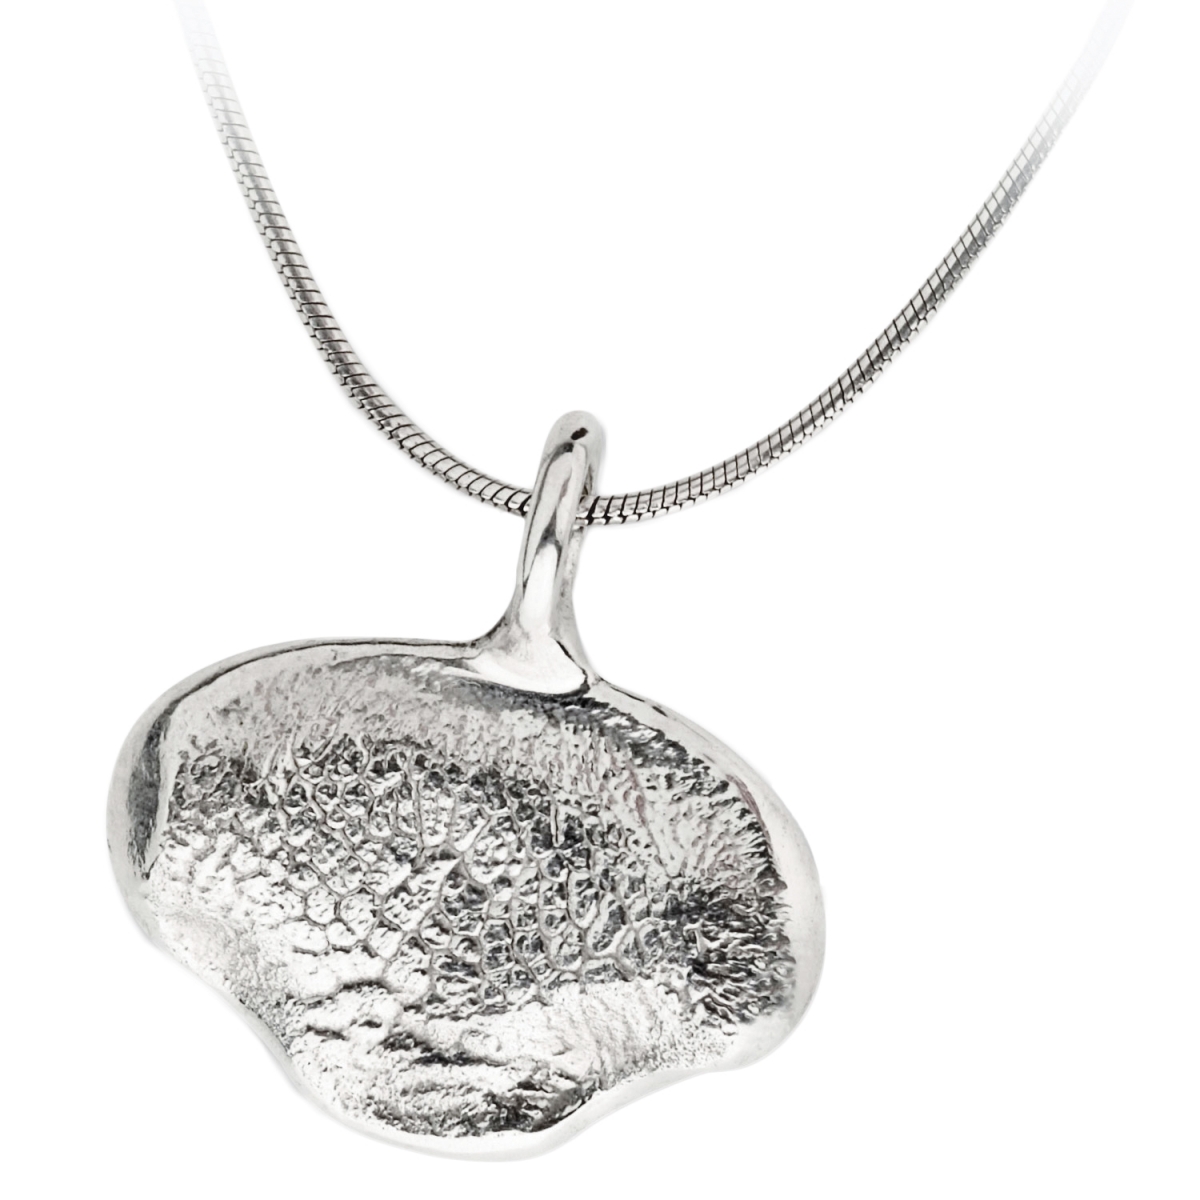 Robin's Loving Touch pendant with dog's nose print